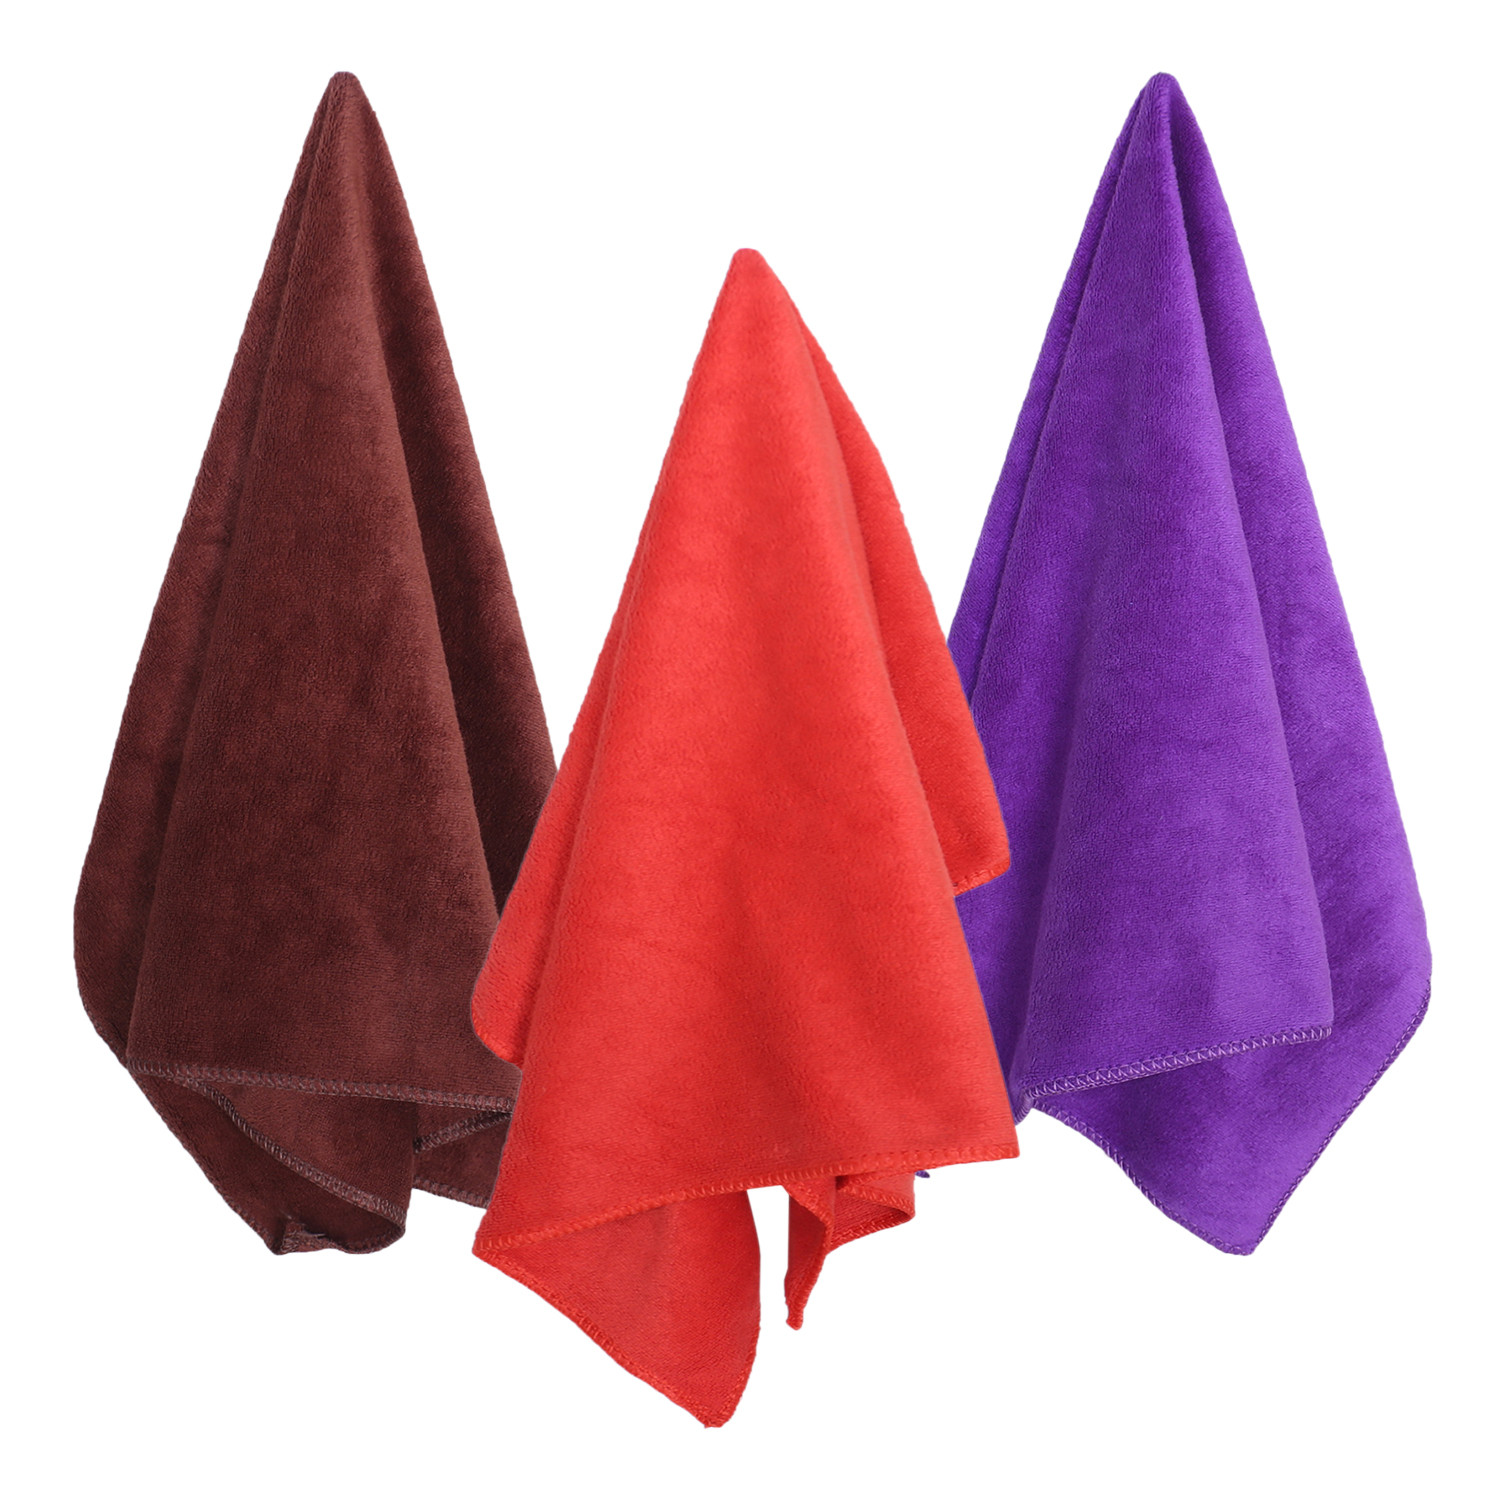 Kuber Industries Cleaning Cloths|Microfiber Highly Absorbent Wash Towels for Kitchen,Car,Window,24 x 16 Inch,Pack of 3 (Red,Purple & Brown)